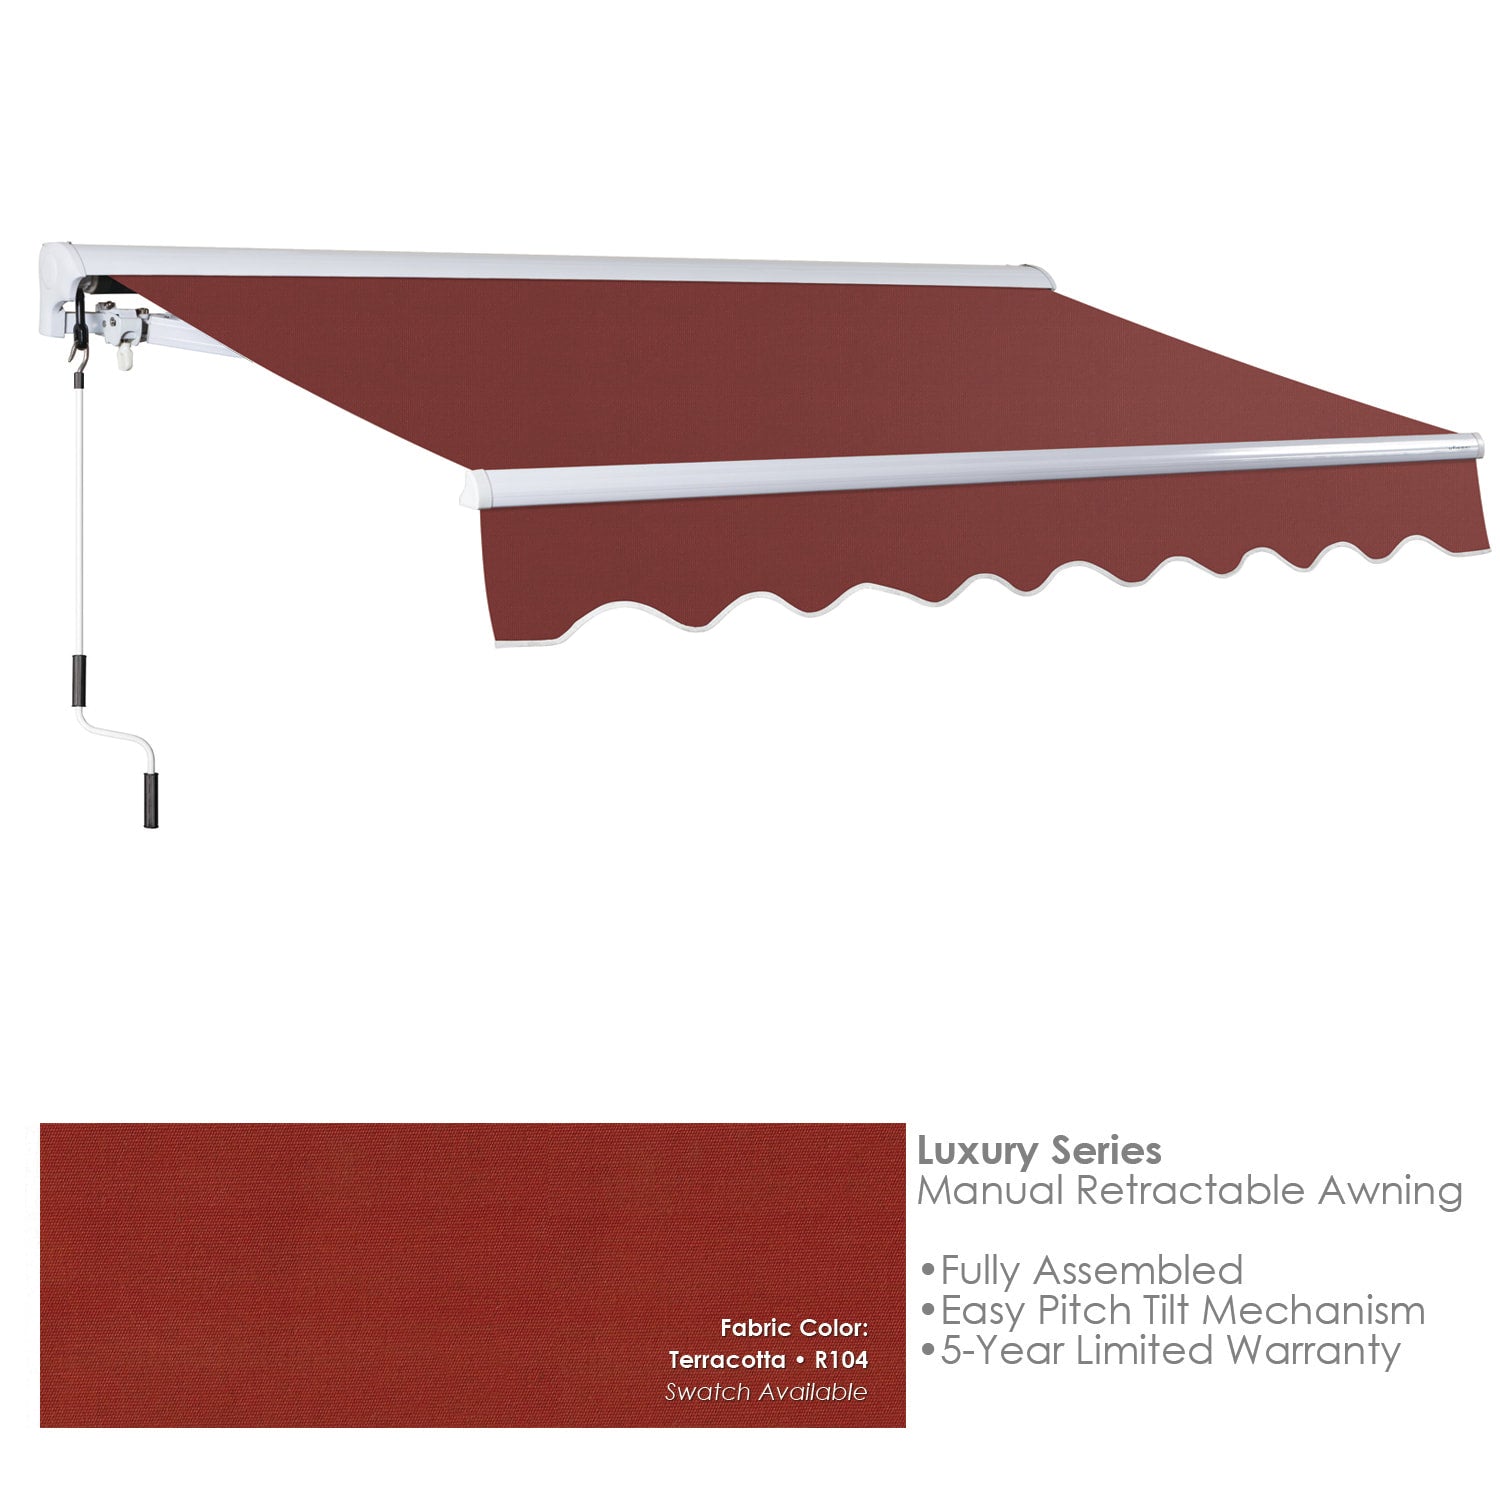 Advaning Luxury Series (Manual Retractable Awning)